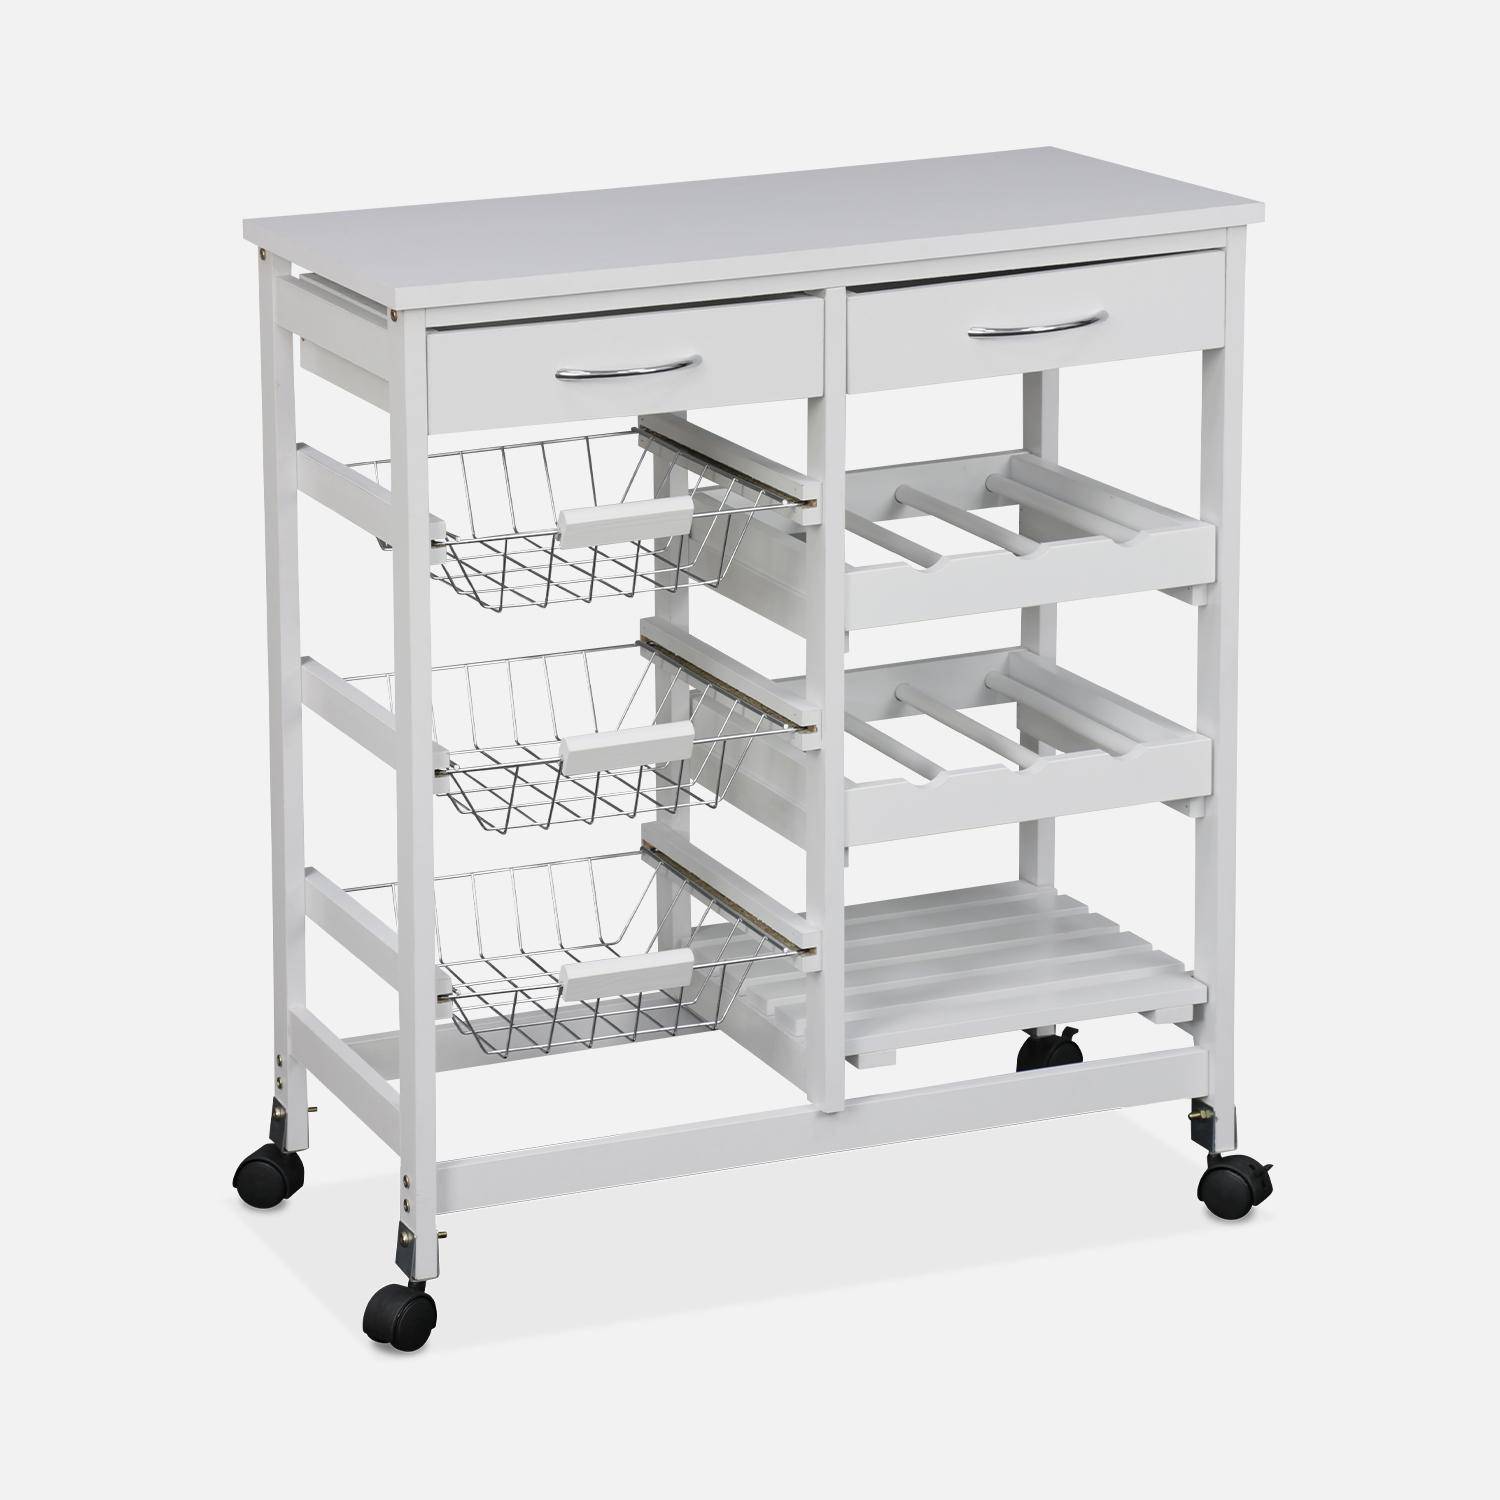 Wood-Effect Kitchen Cart with Wheels - 65x35 cm, white Photo6